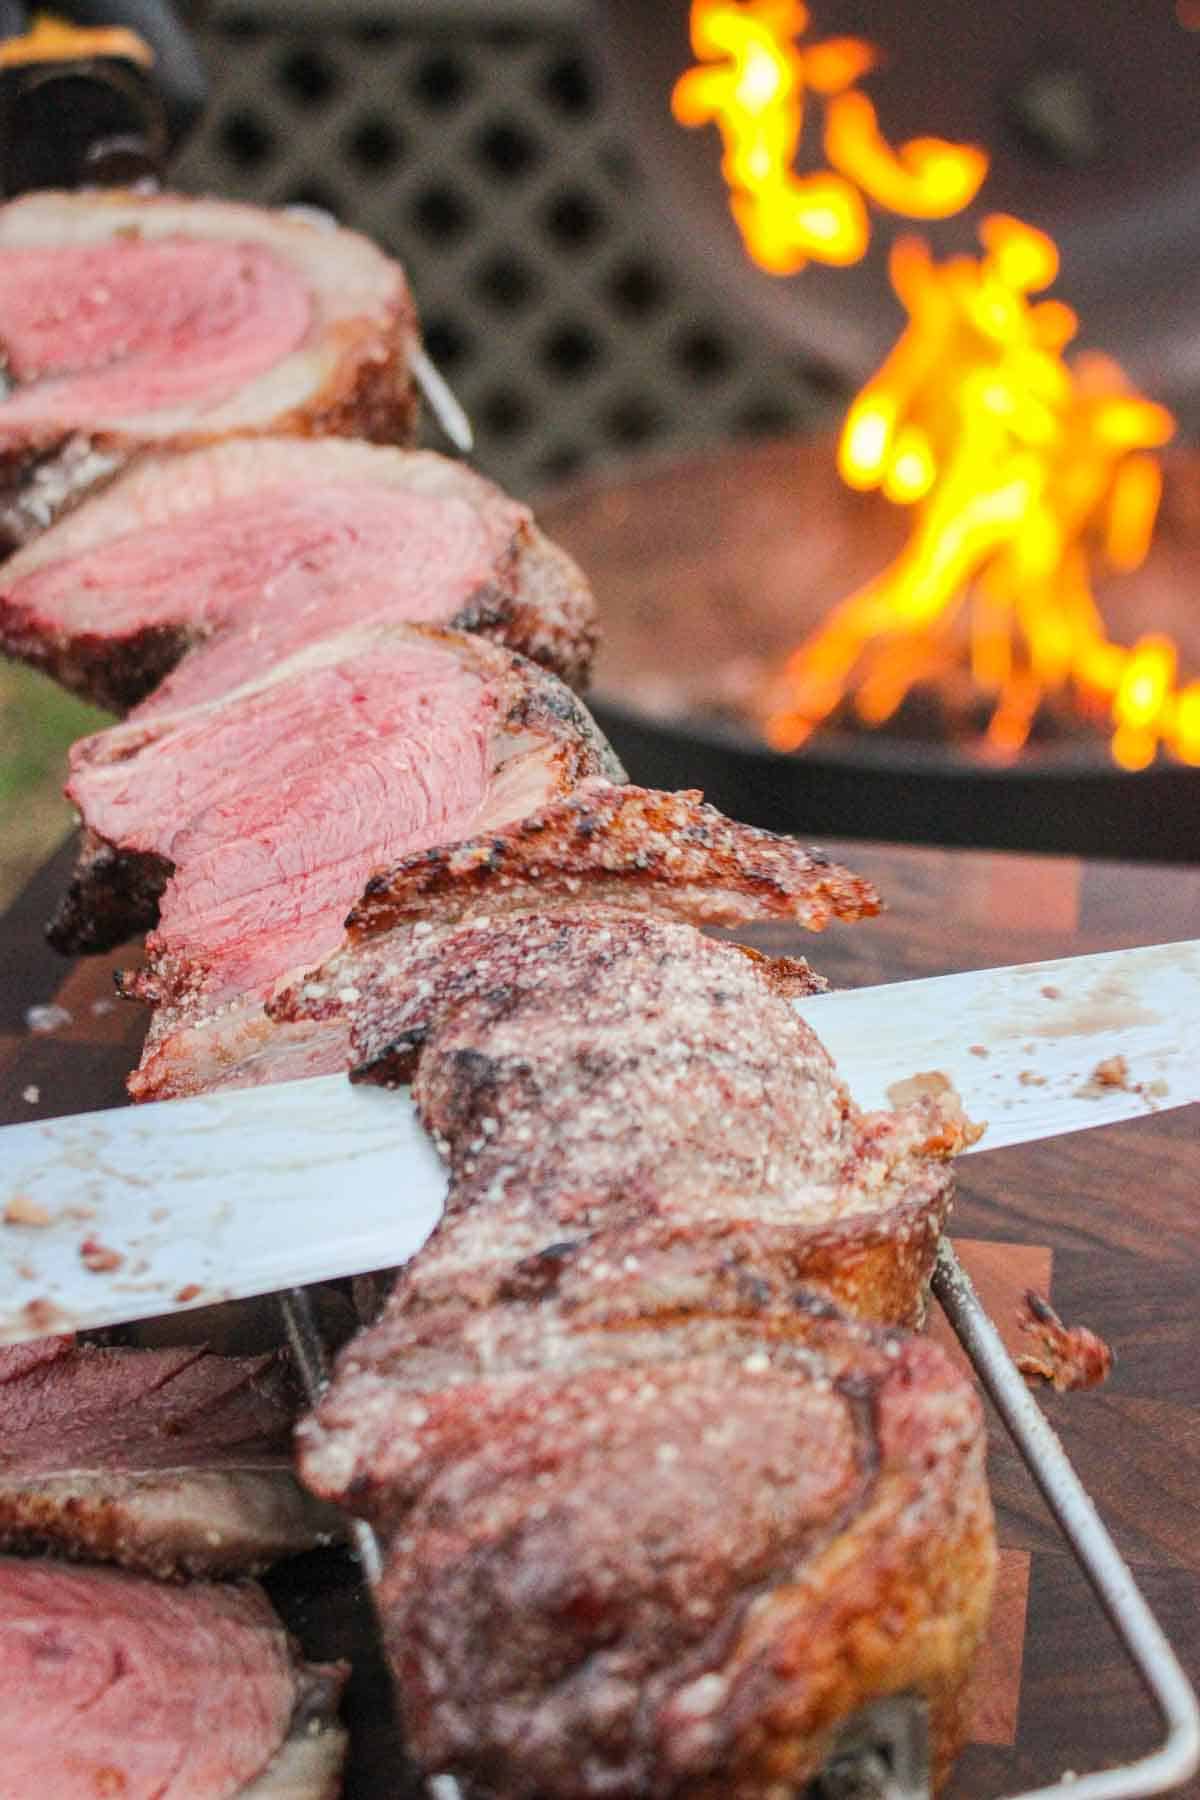 A close up shot of the picanha getting sliced.